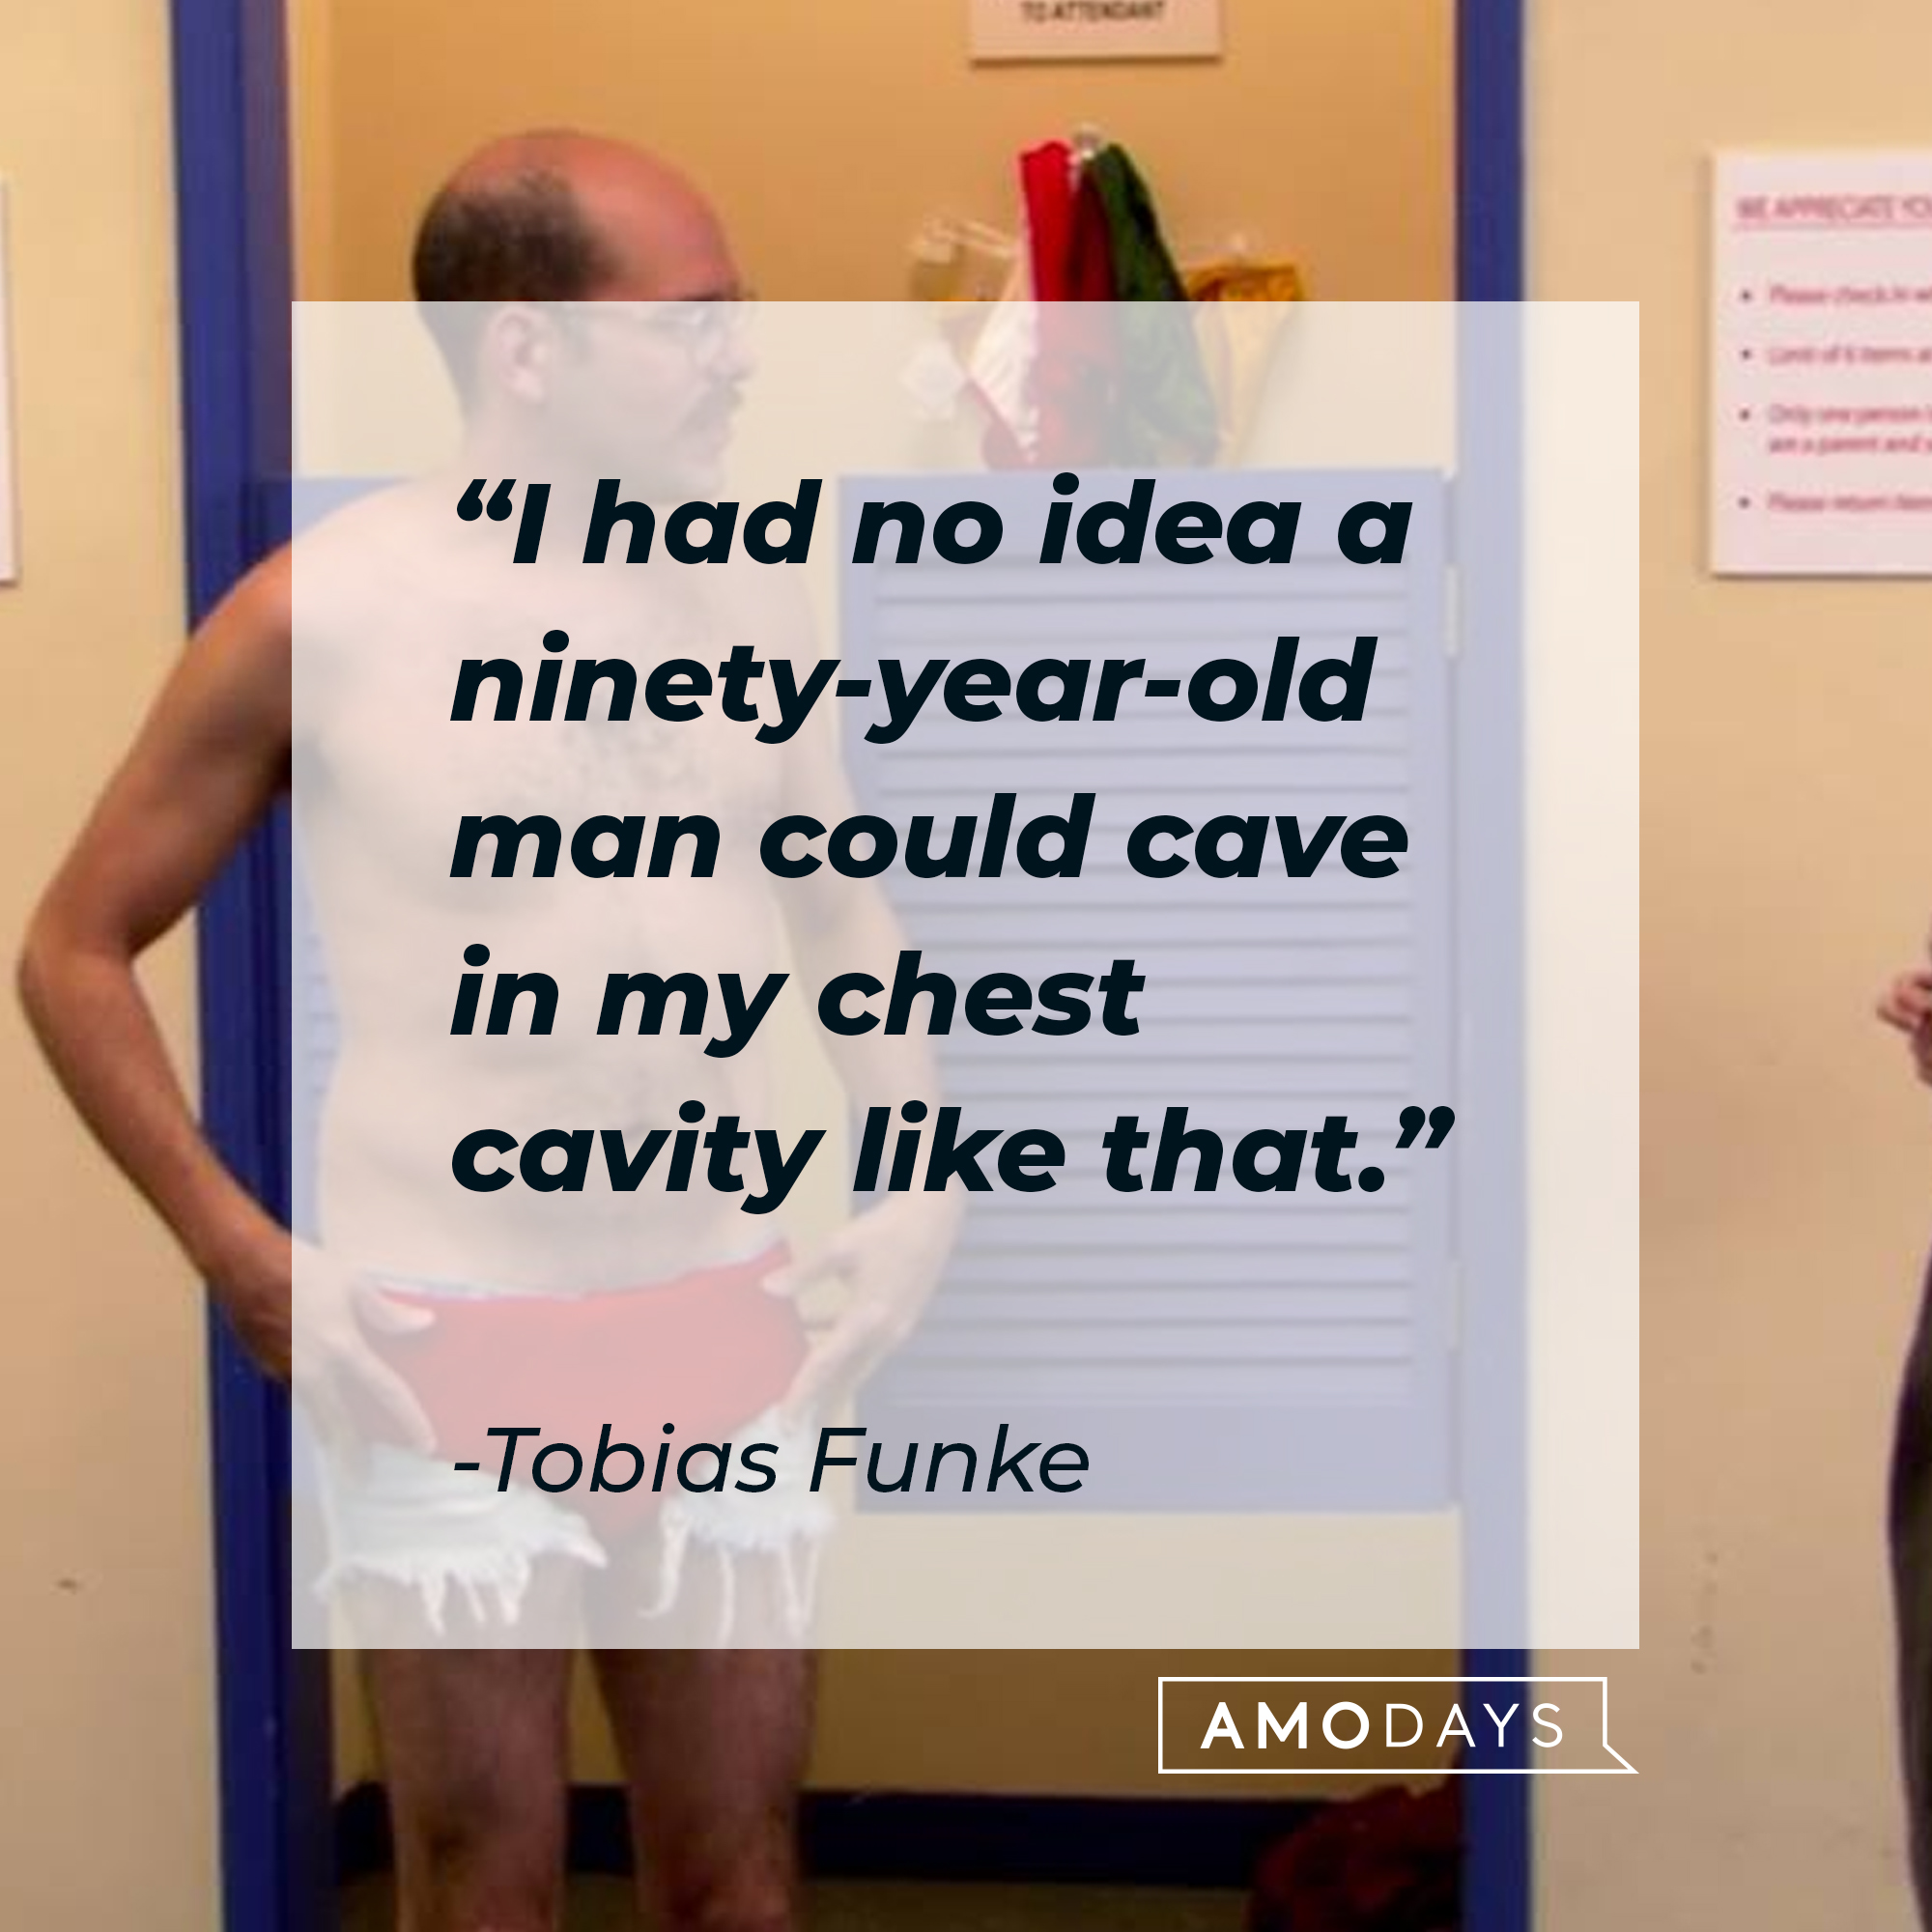 Tobias Funke's quote: "I had no idea a ninety-year-old man could cave in my chest cavity like that." | Source: Facebook.com/ArrestedDevelopment